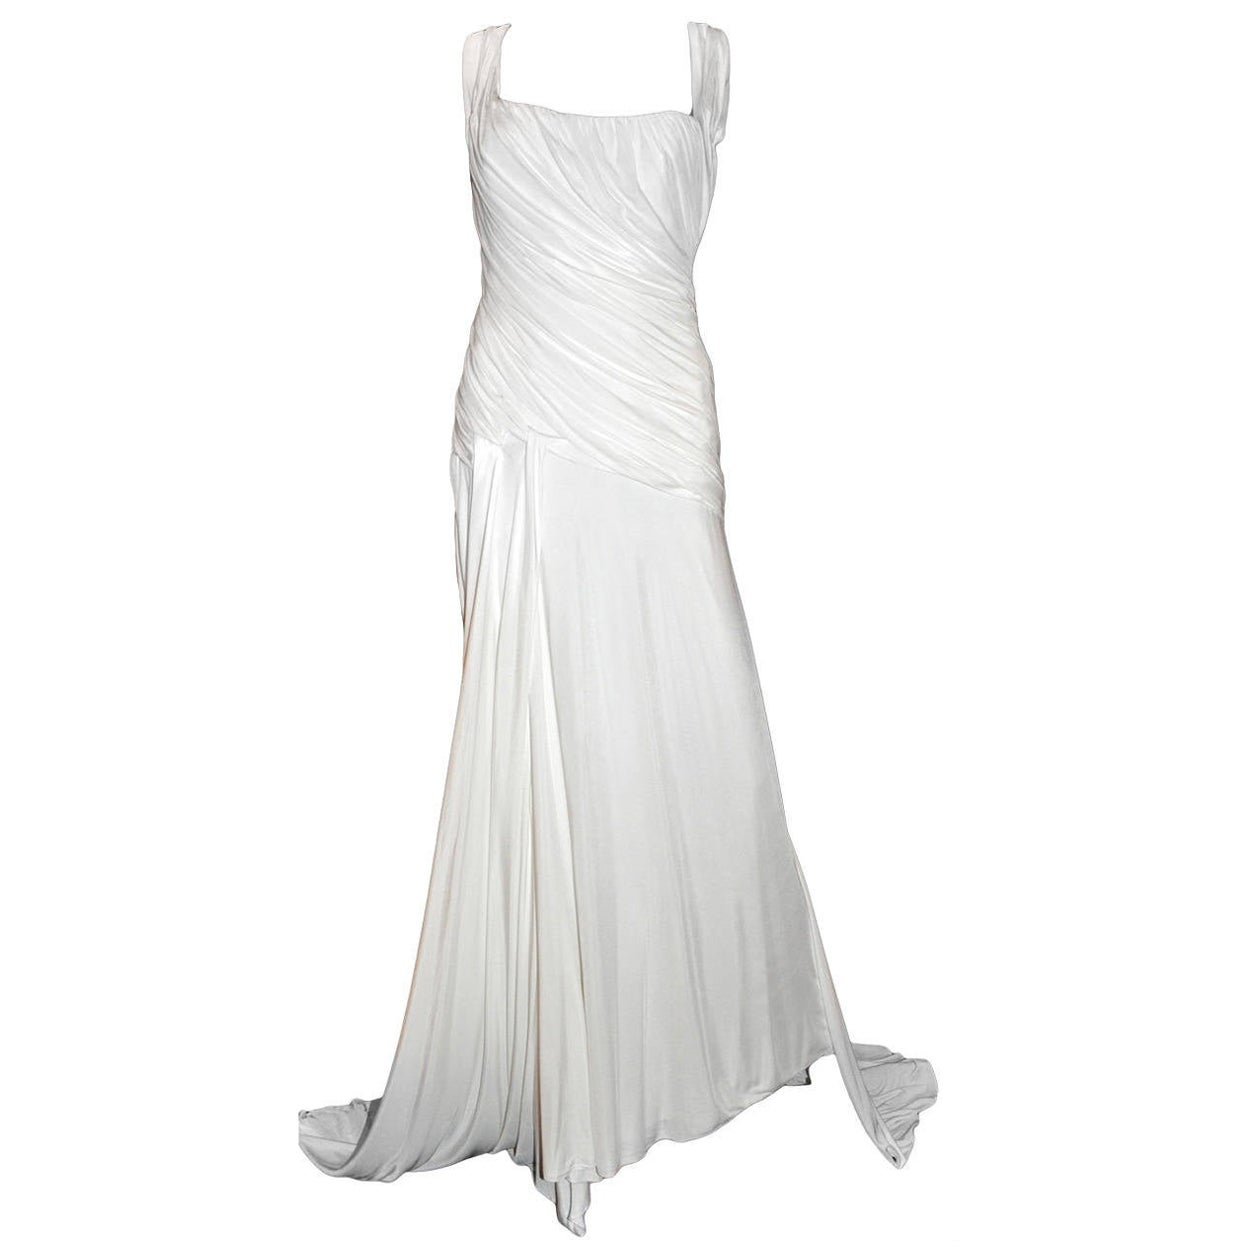 VERSACE WHITE GRECIAN GOWN DRESS Sz IT 40 - US 4/6 For Sale